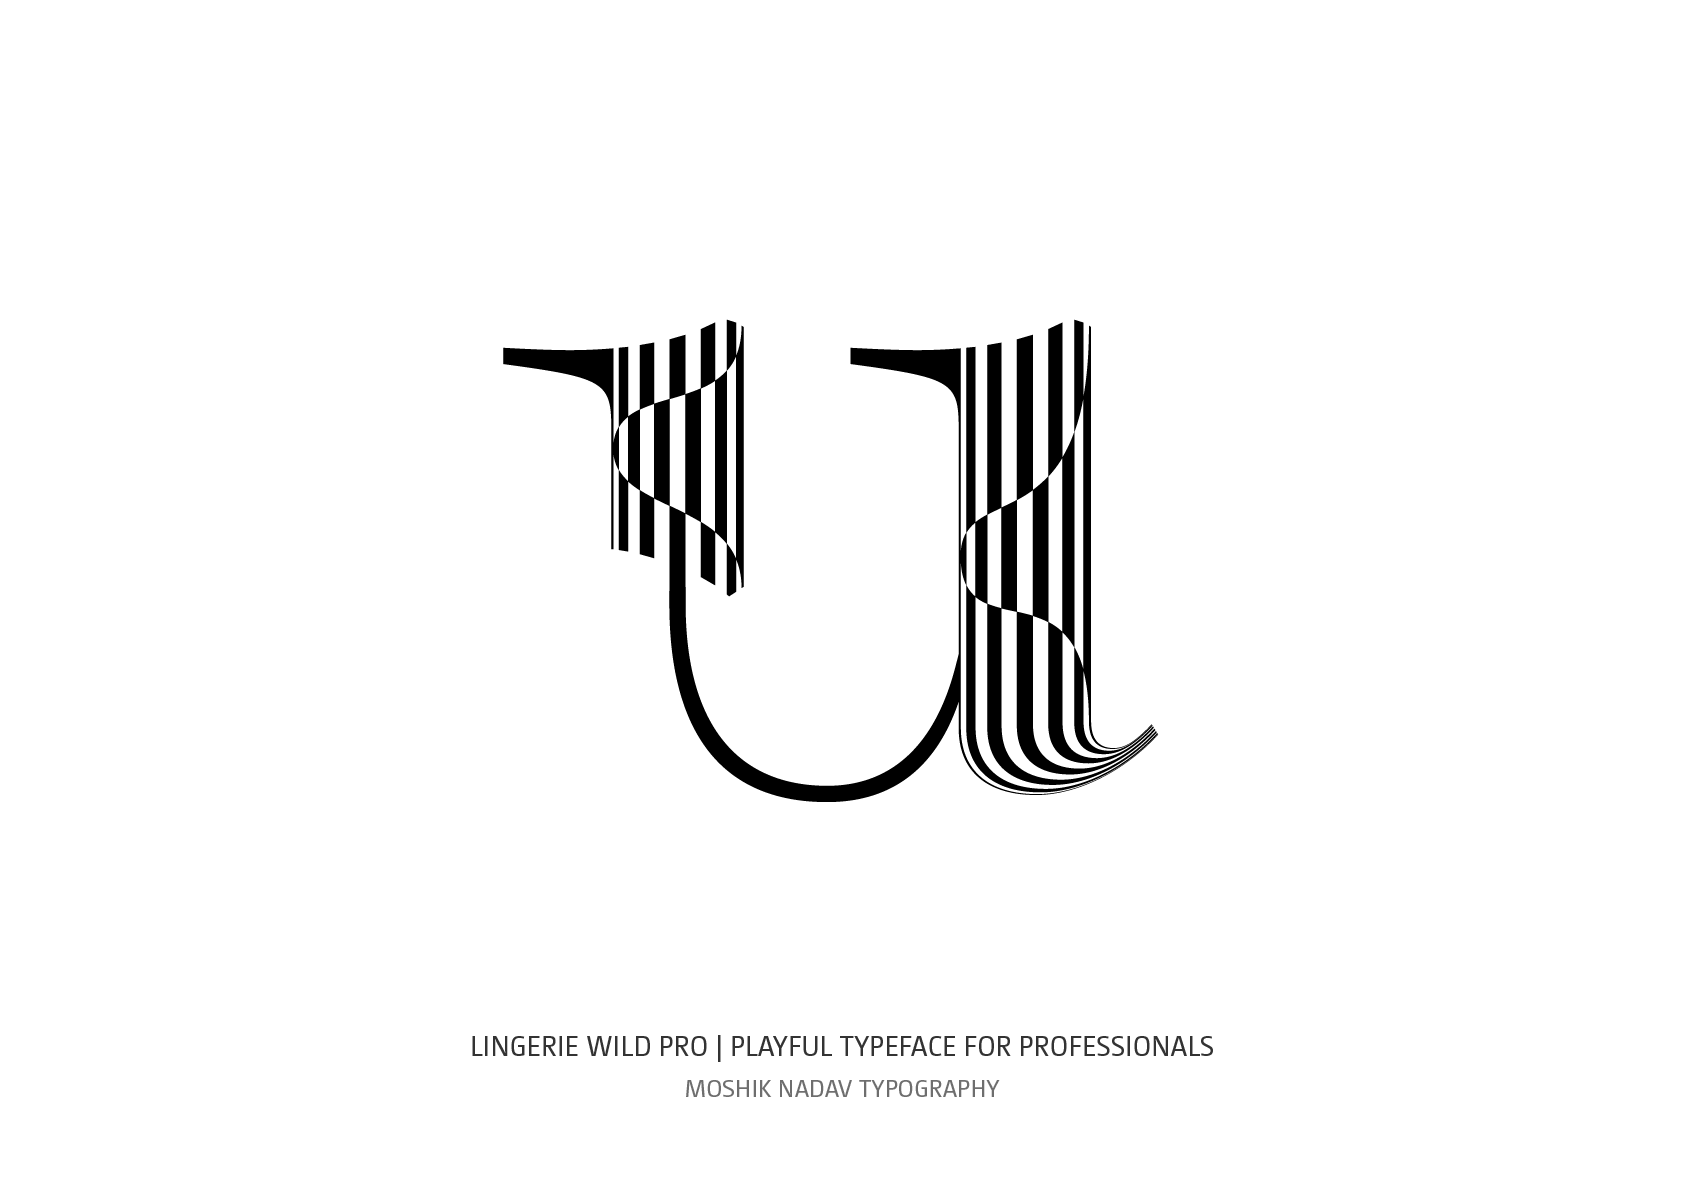 Unique lowercase u designed with Lingerie Wild Pro Typeface Super cool Lingerie Wild Pro Typeface design for cool logos and fashion magazines by Moshik Nadav Typography